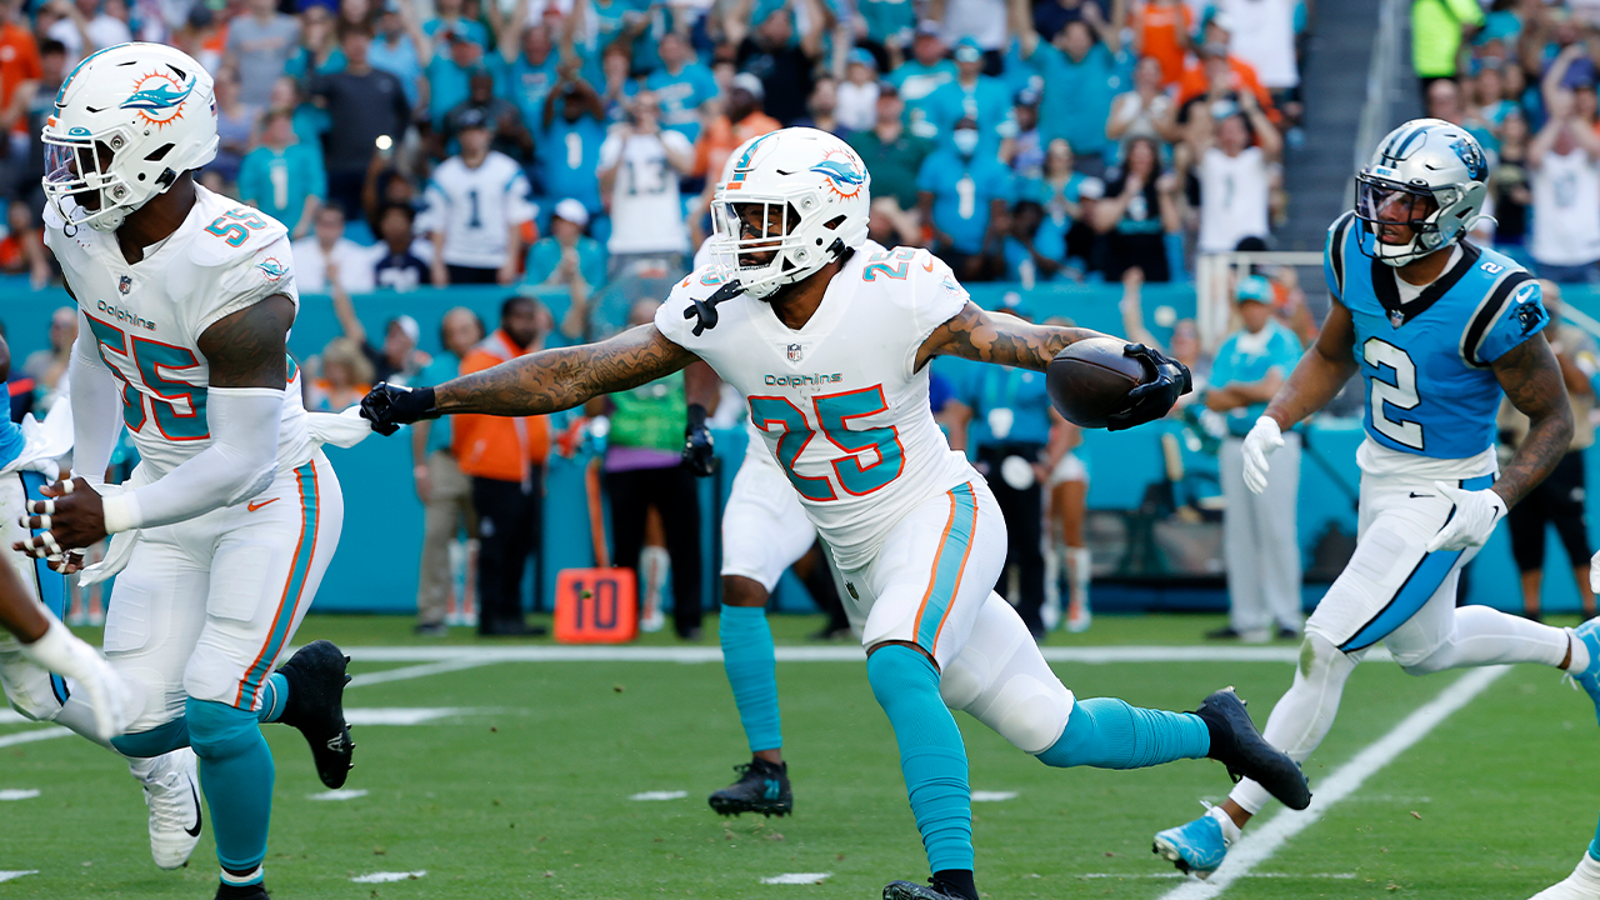 Miami's defense shines with three interceptions in a 33-10 win over the Panthers